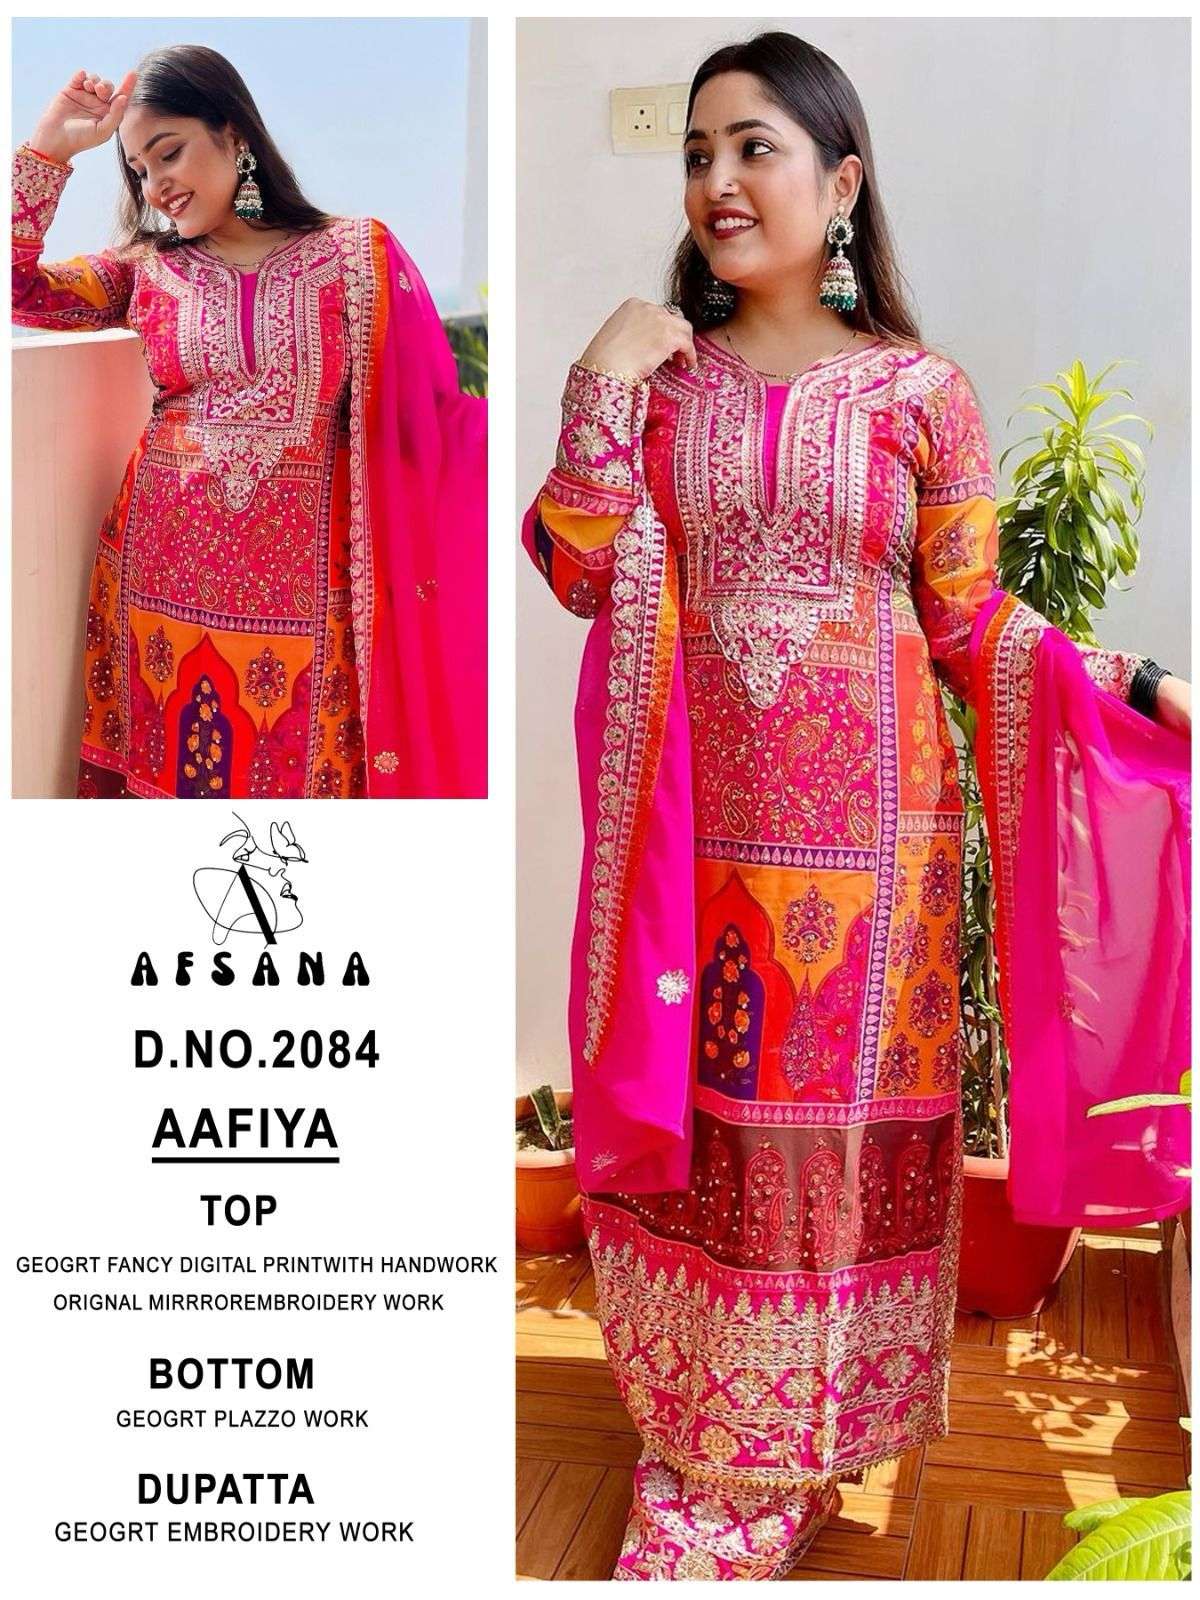 afsana aafiya d no 2084 georgette regal look top bottom with dupatta size set